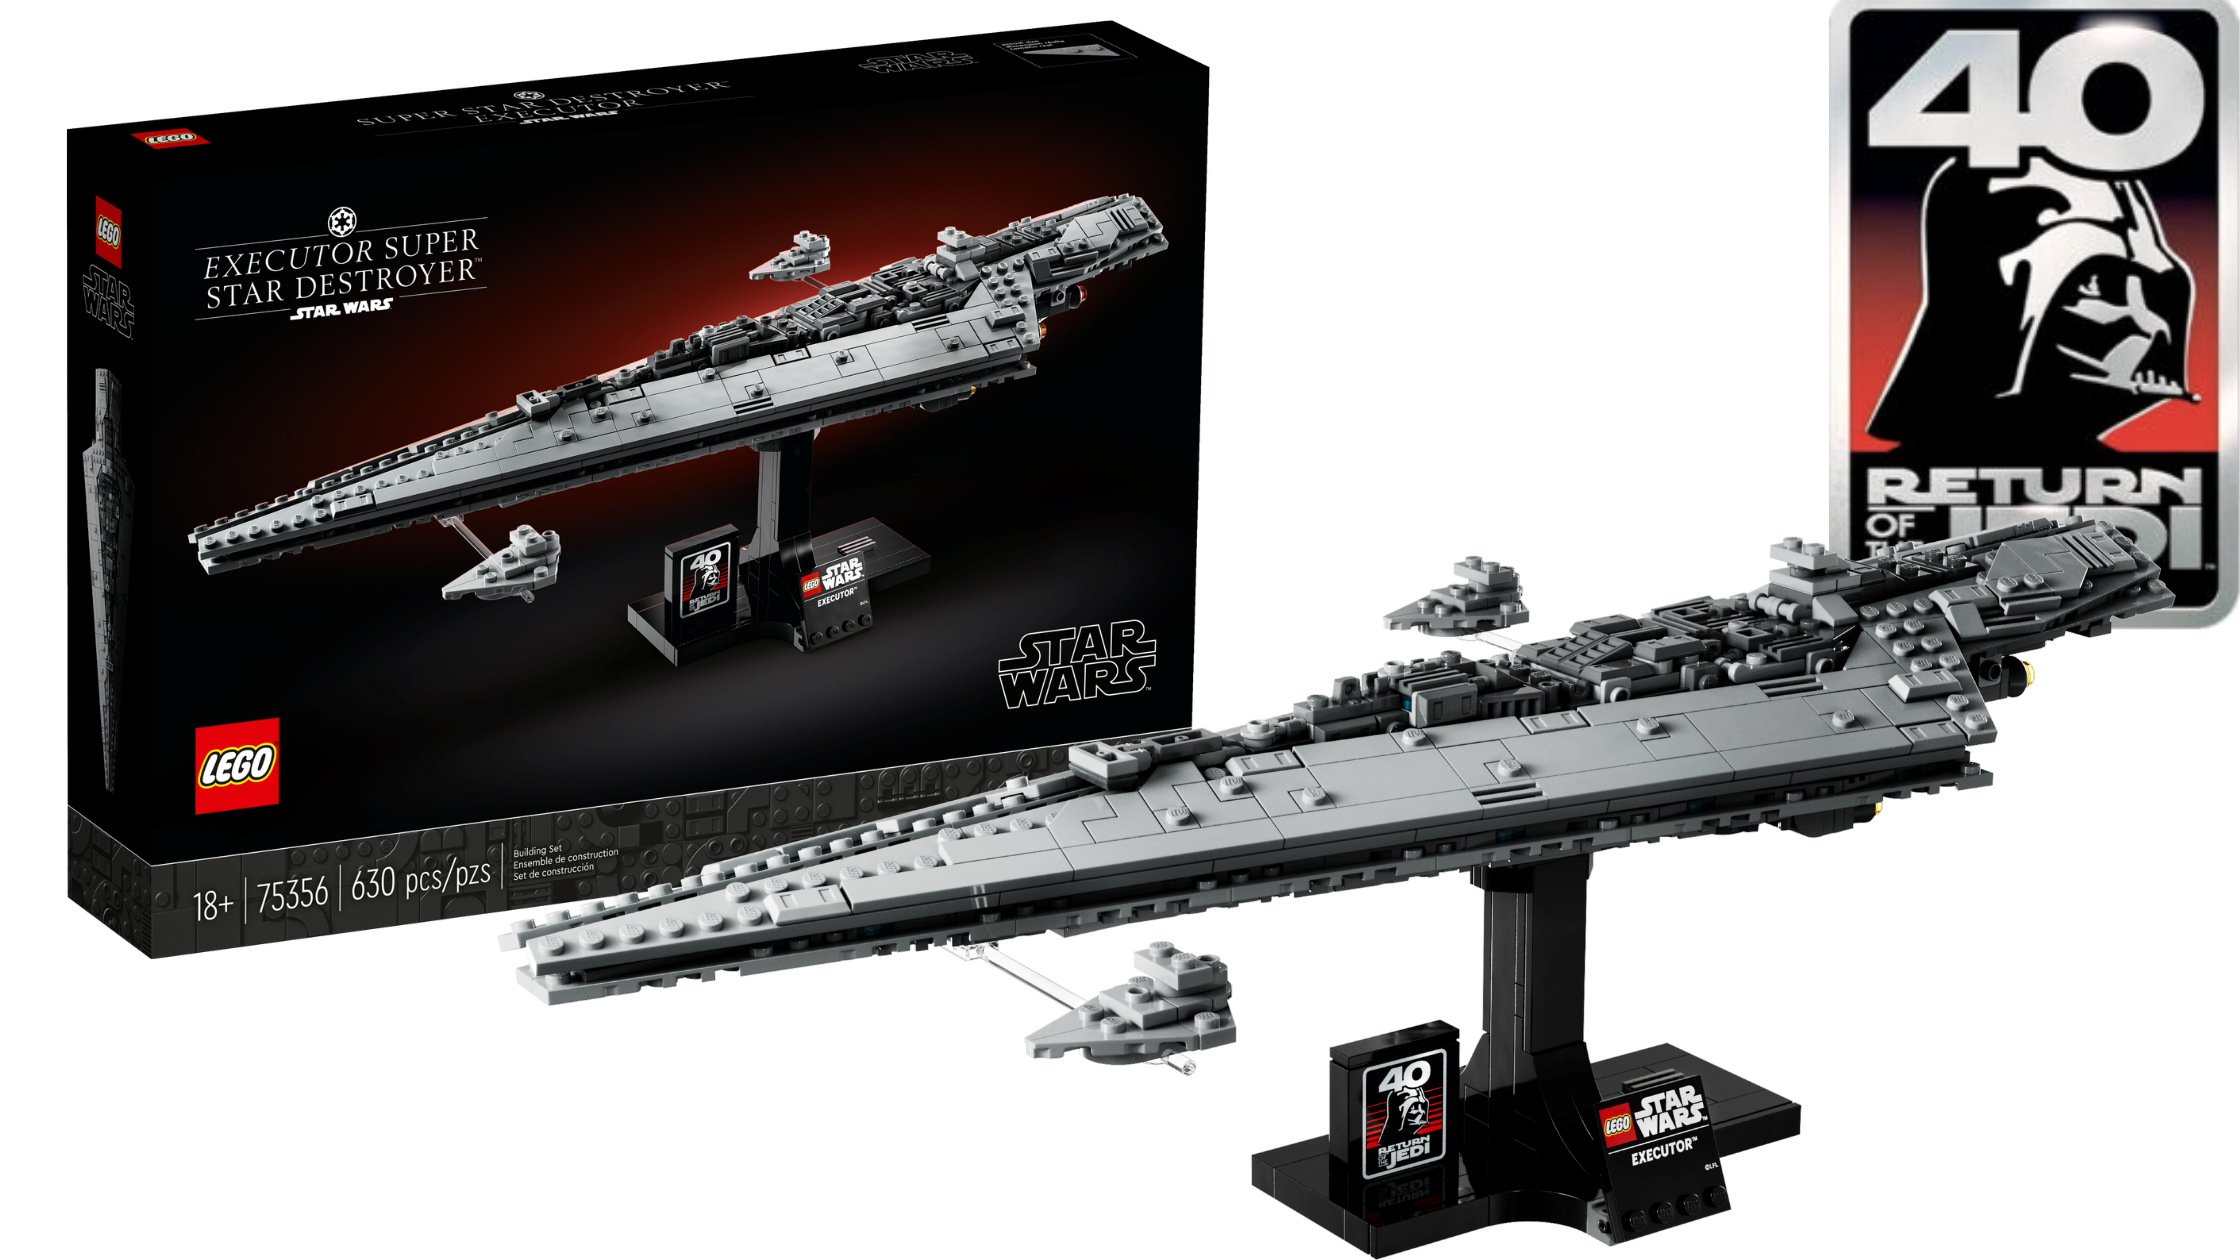 LEGO 75356 Executor Super Star Destroyer officially revealed with pre